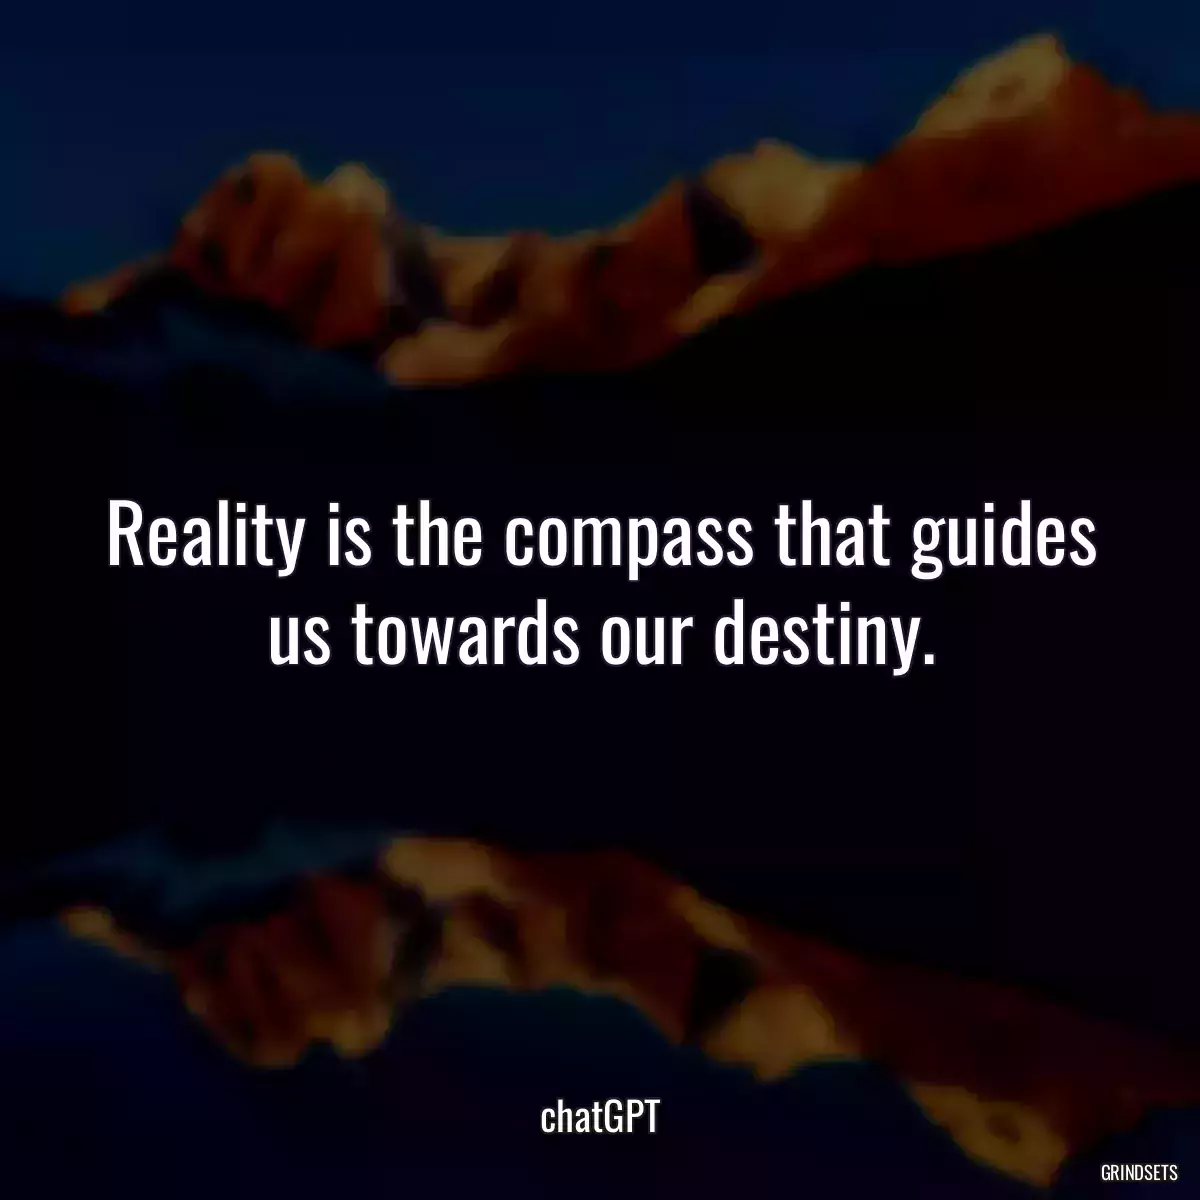 Reality is the compass that guides us towards our destiny.